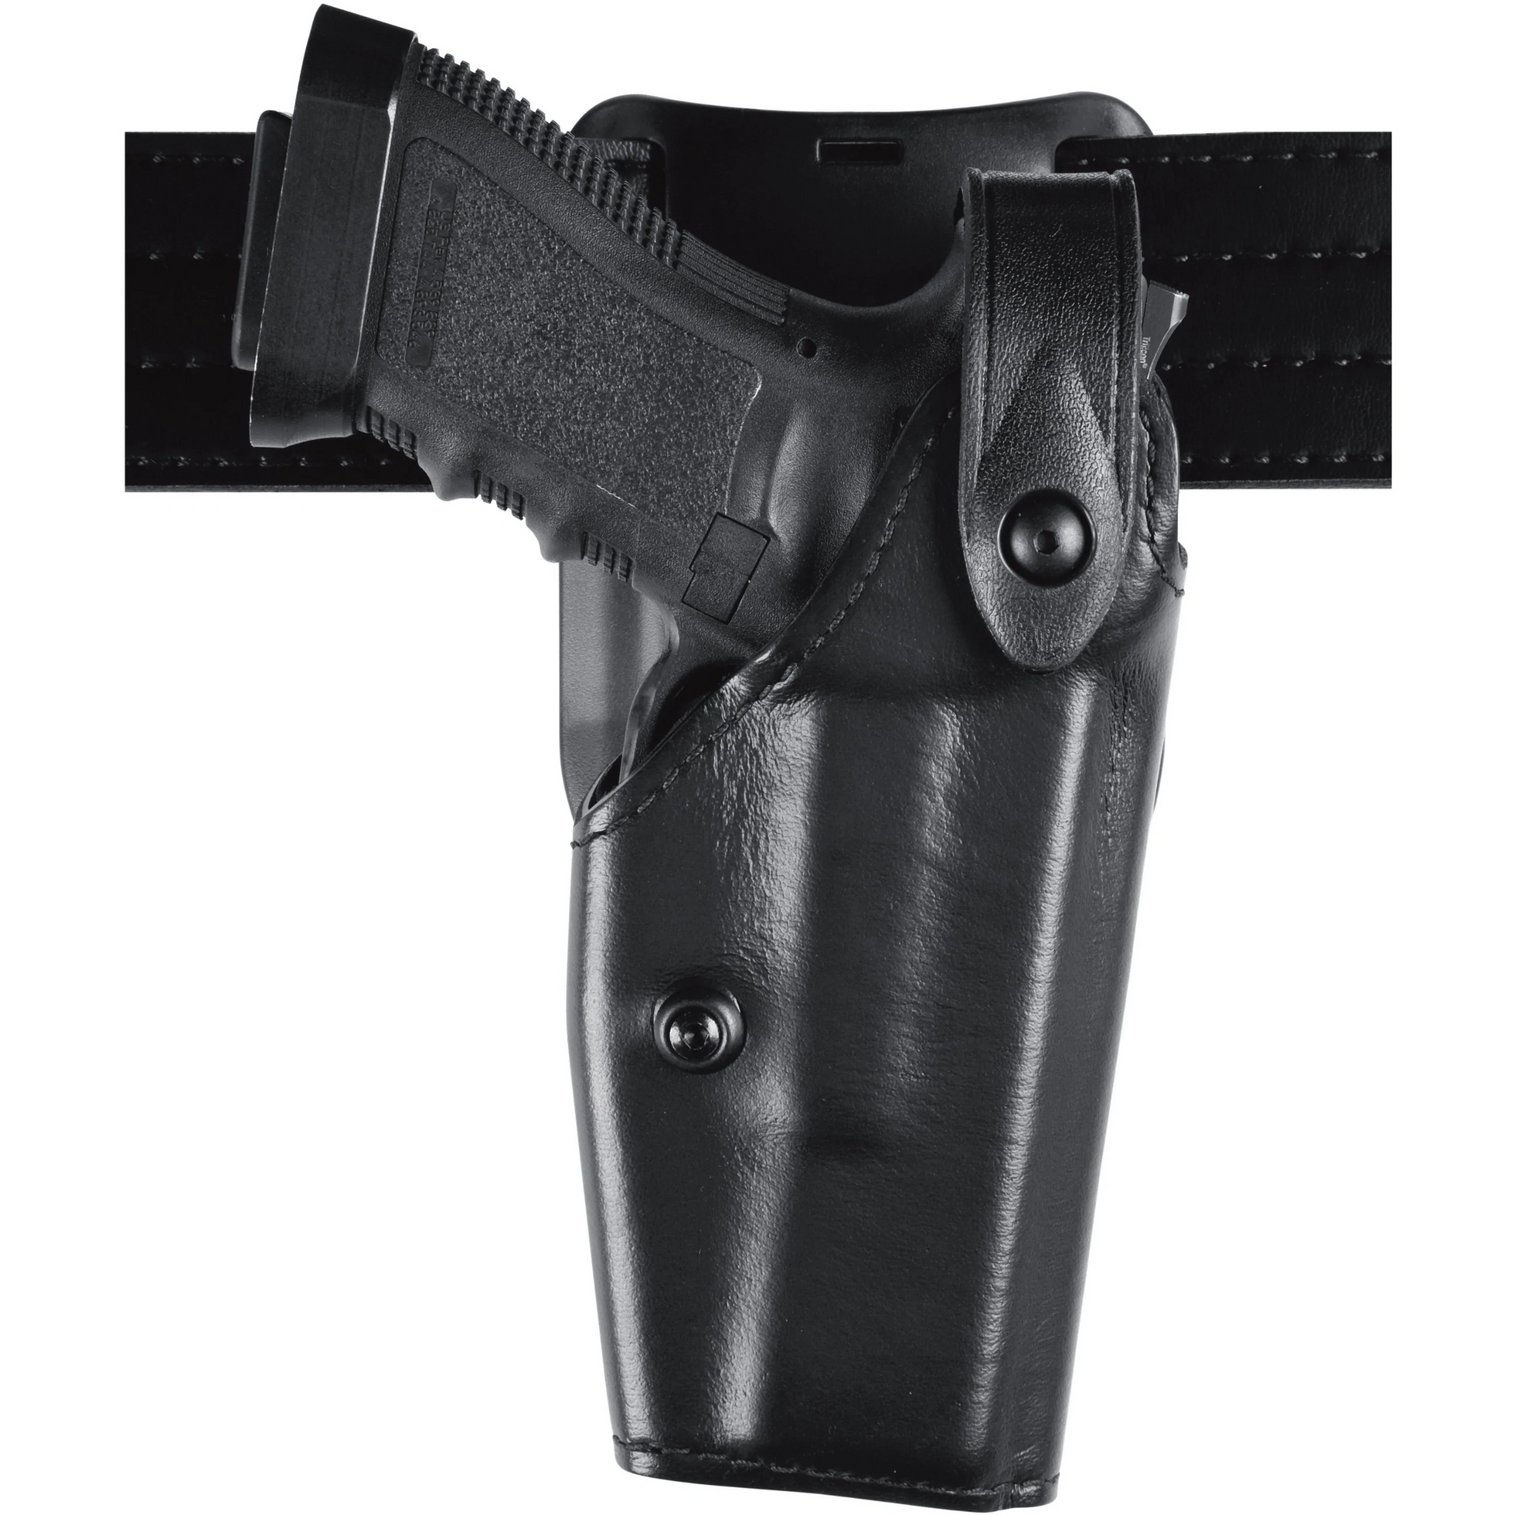 Model 6285 Sls Low-ride, Level Ii Retention Duty Holster For Sig Sauer P320 9c